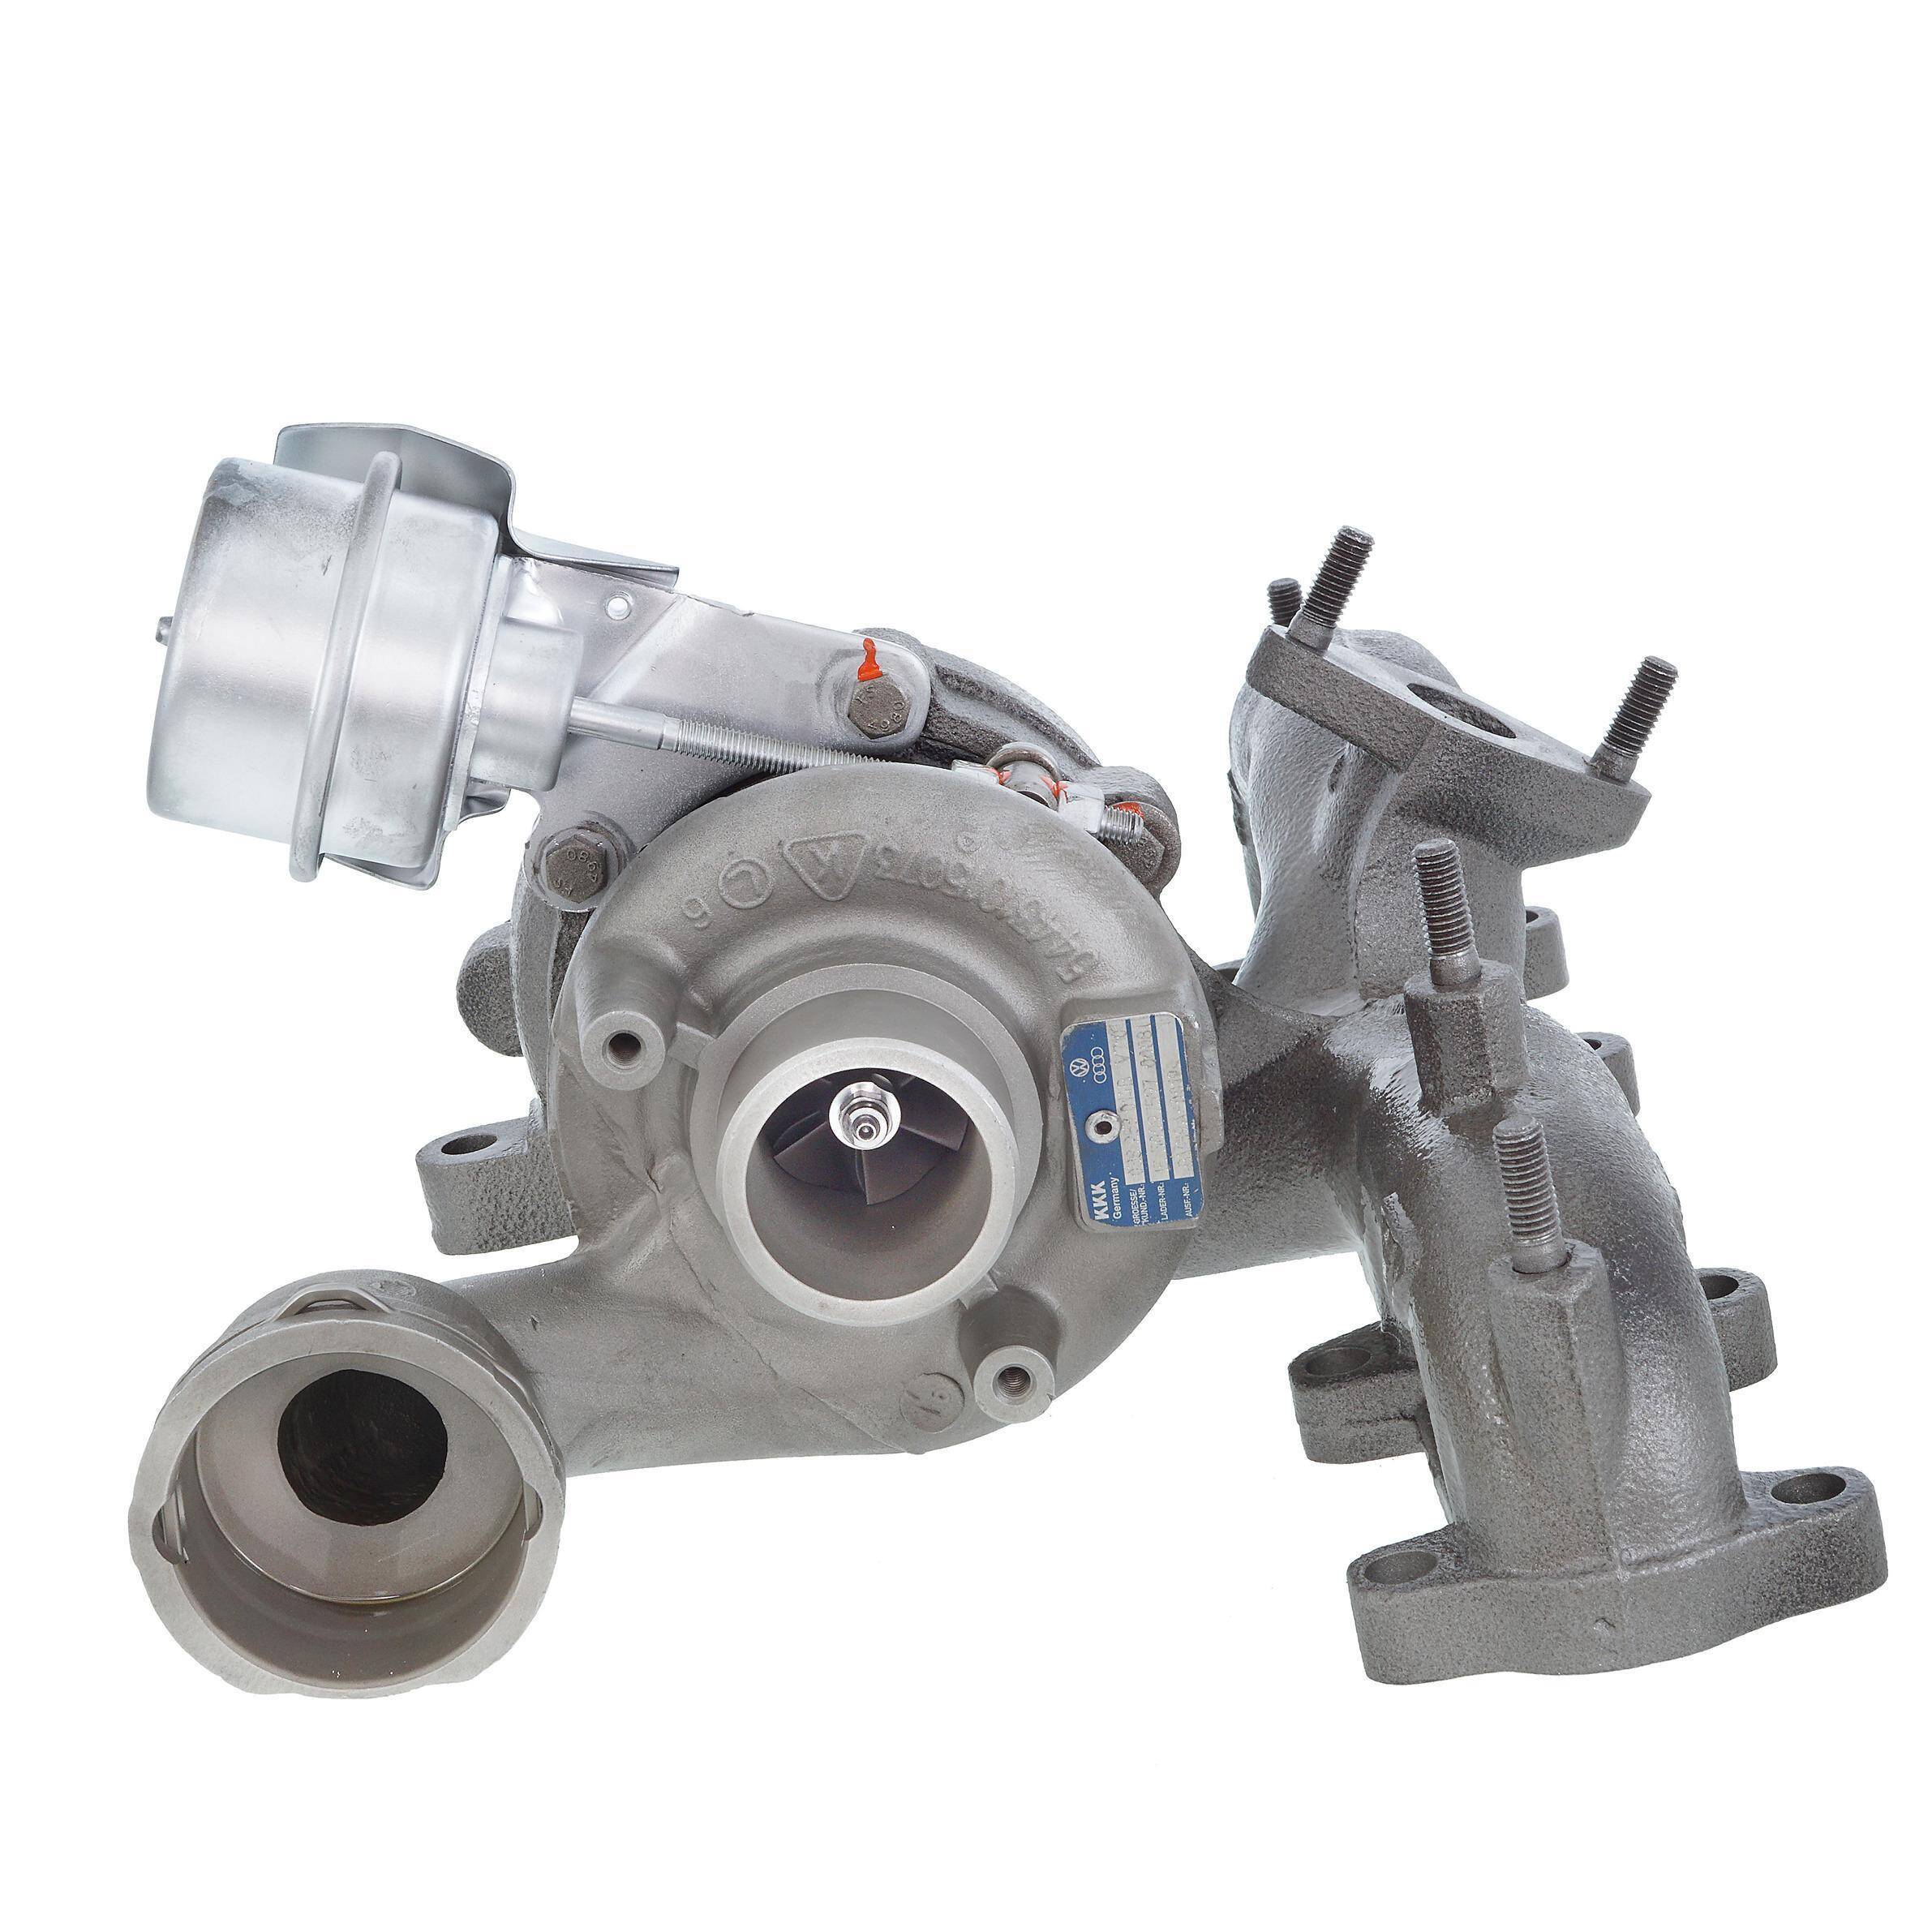 TURBOCHARGER TURBO REMANUFACTURED 54399700008 19 54399880019